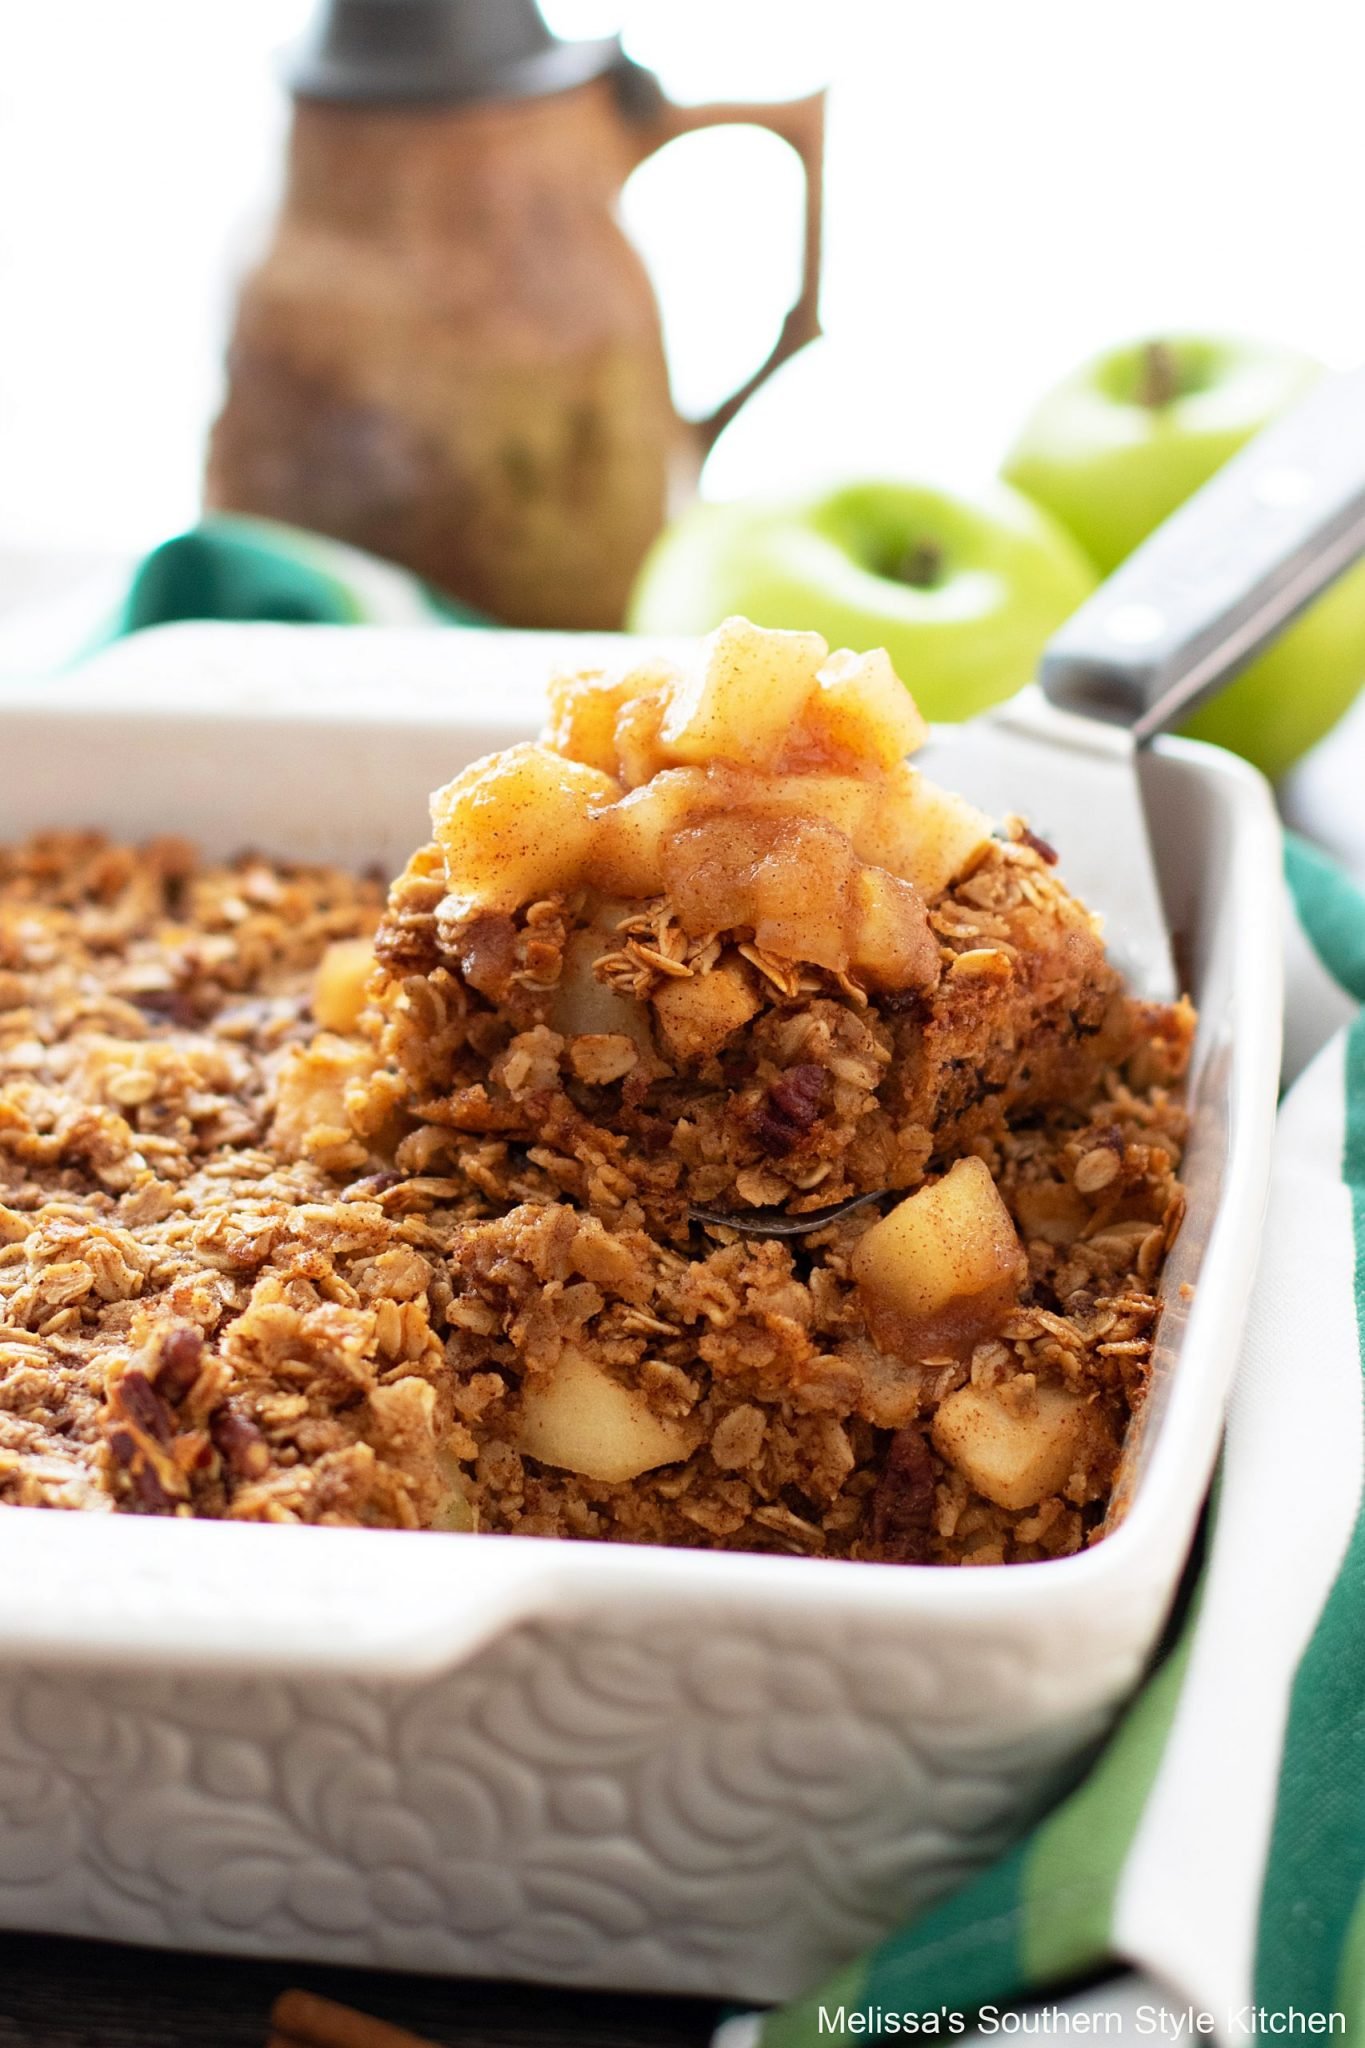 Baked Oatmeal Recipe with apples